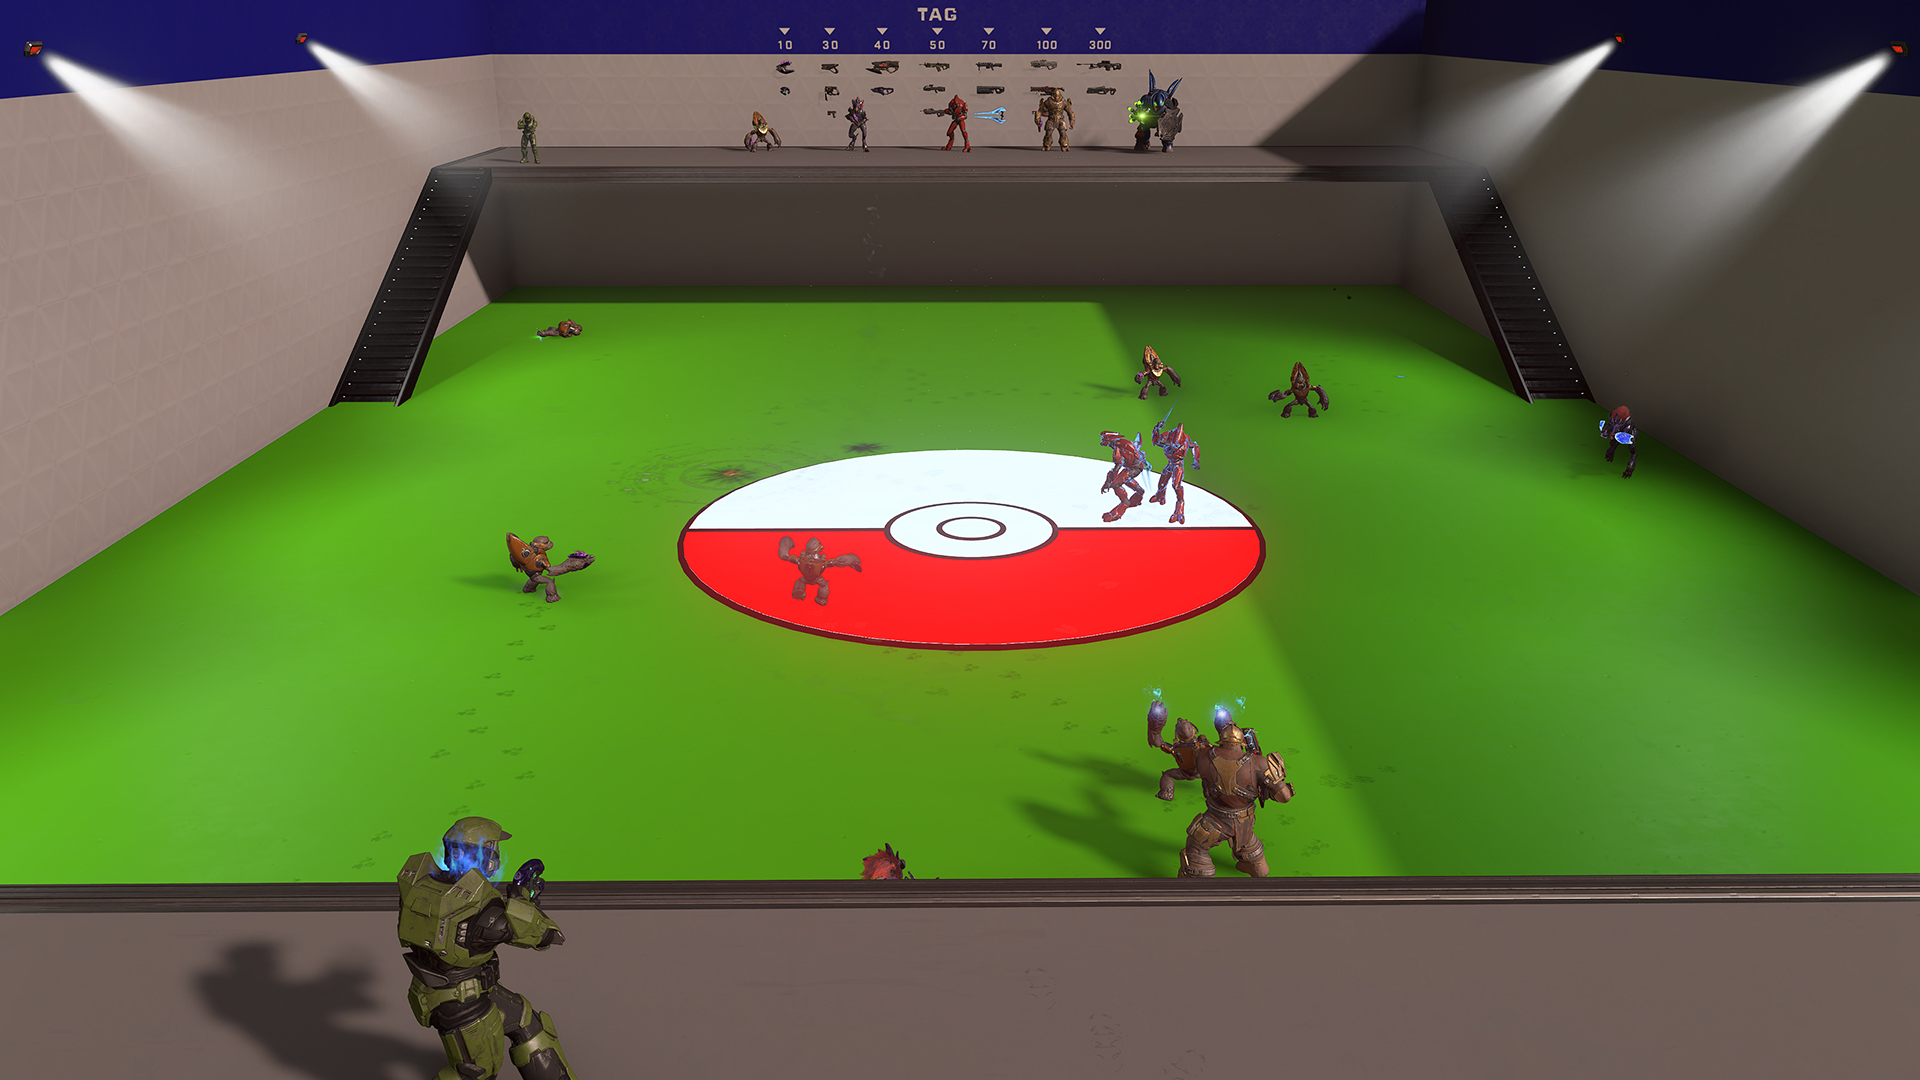 Recreation of a game allowing you to catch all the Halo enemies in one go.